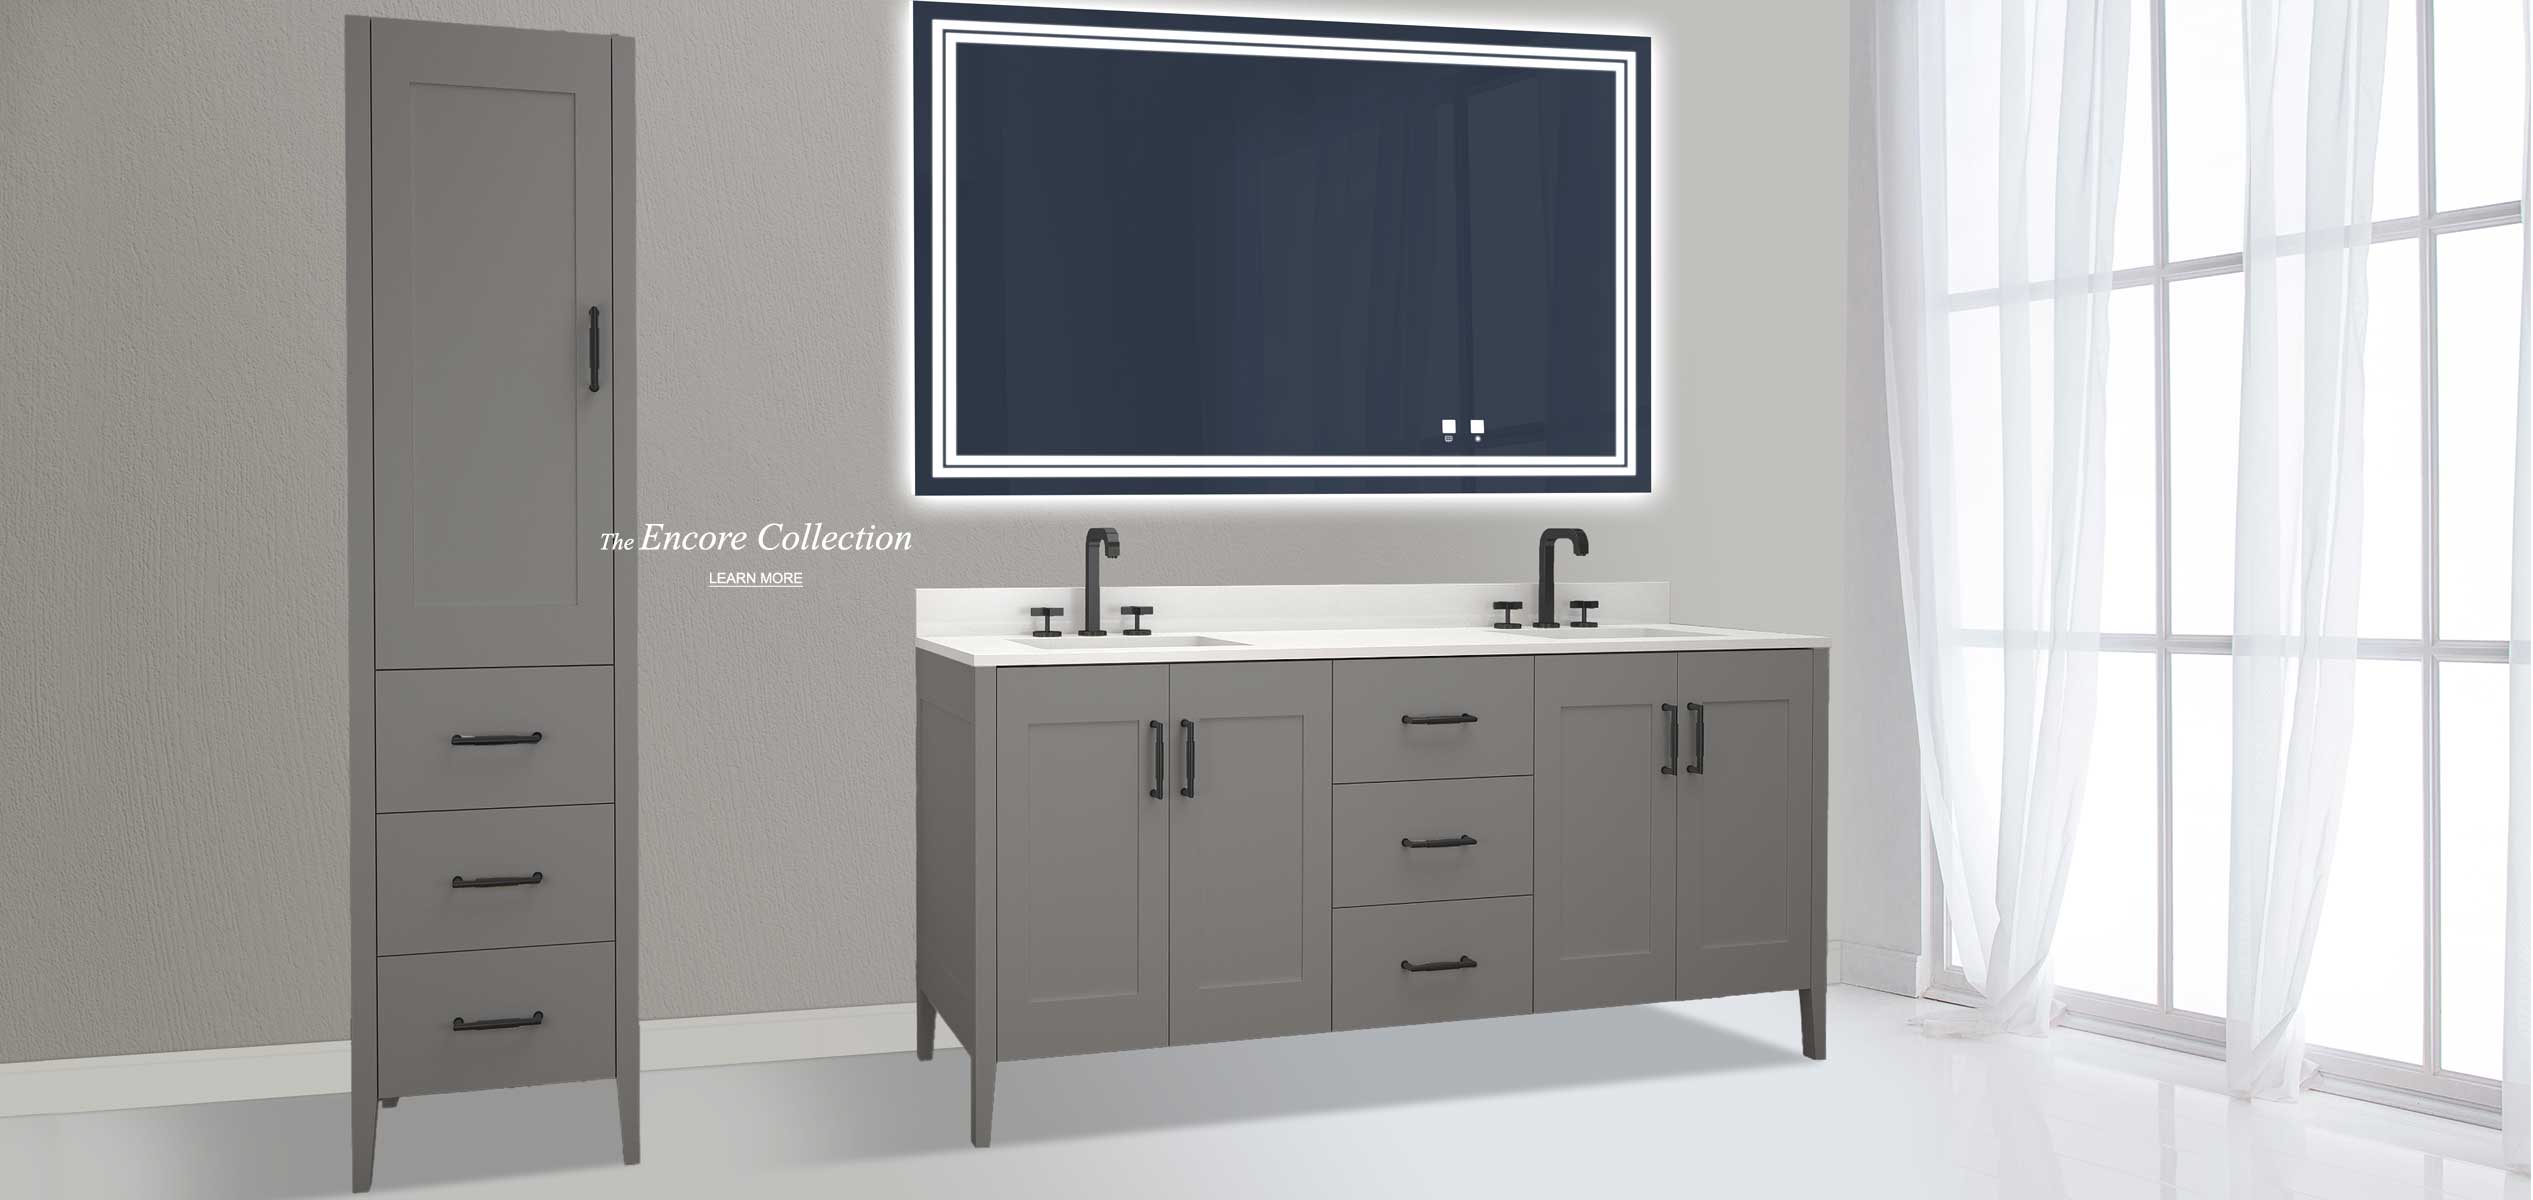 Encore 72 inch double bowl vanity and linen cabinet in Studio Grey finish and slique lighted mirror